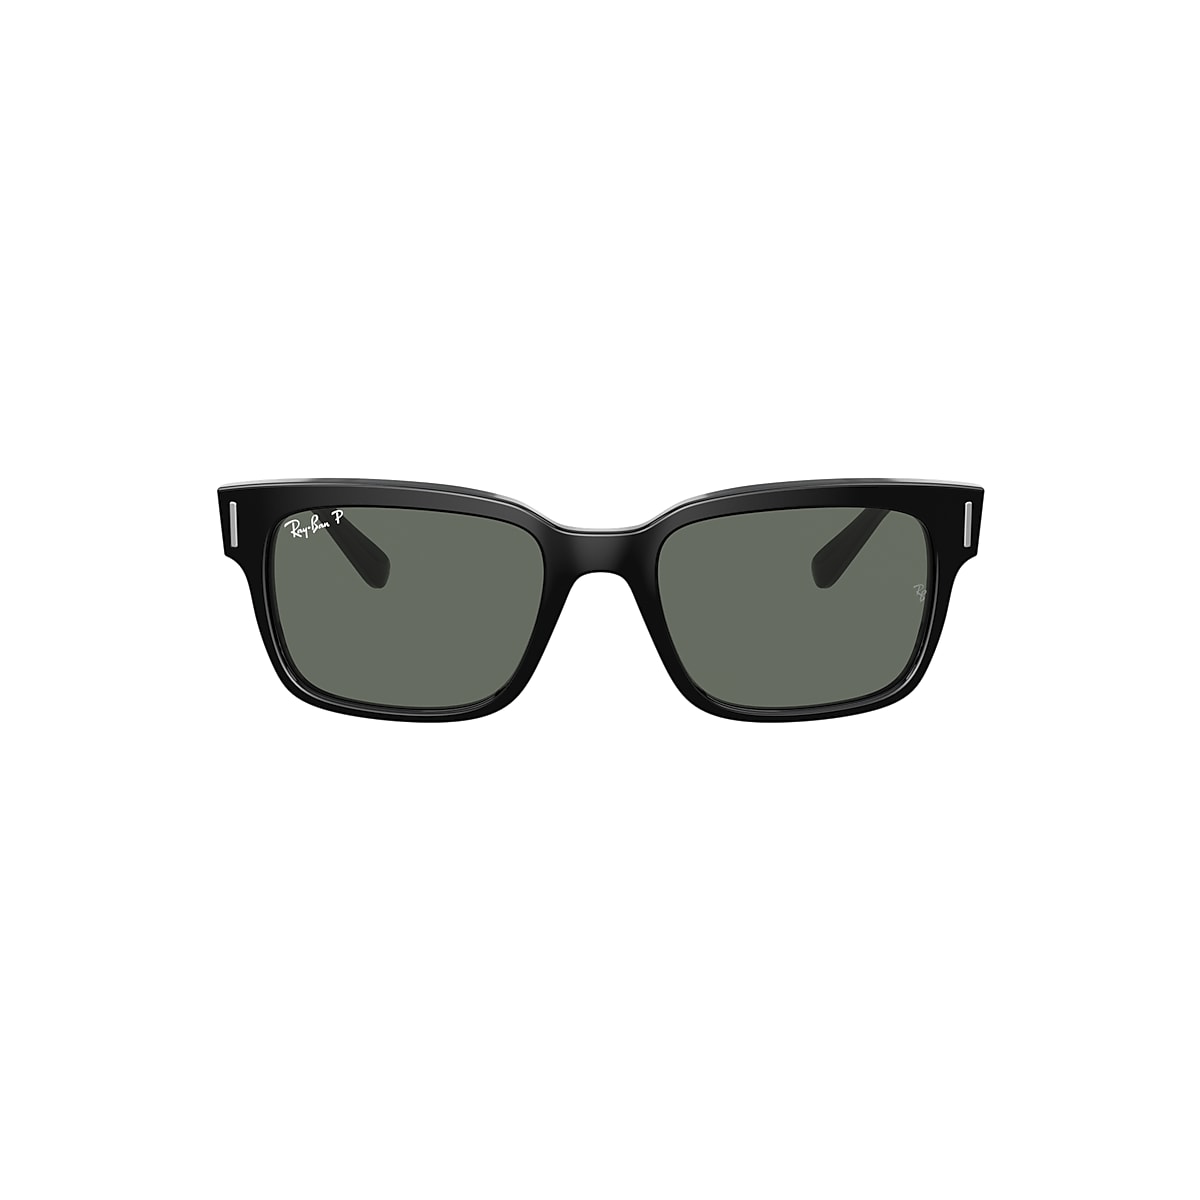 JEFFREY Sunglasses in Black and Green - RB2190 | Ray-Ban® EU